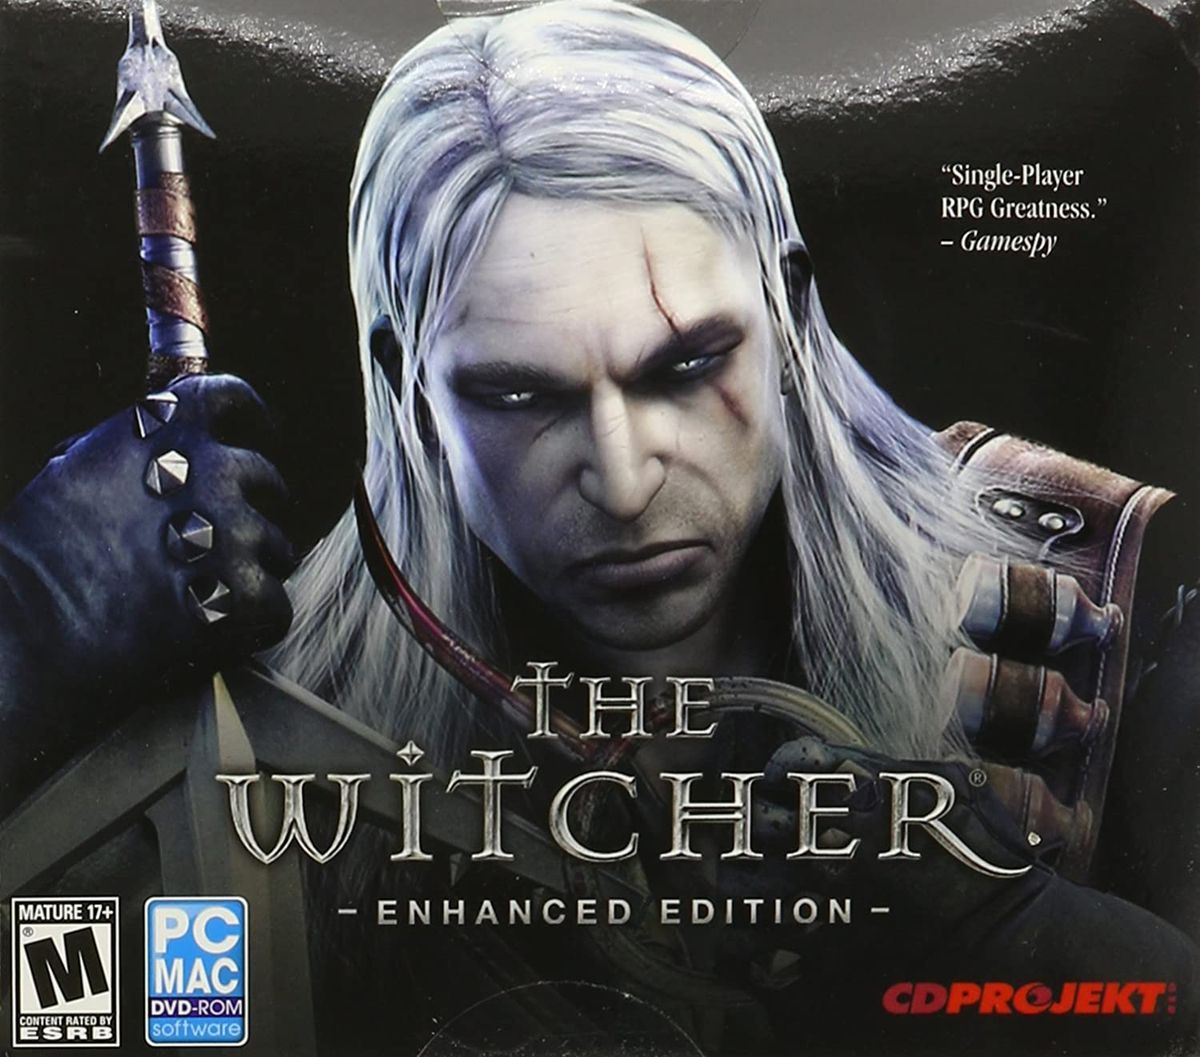 Download The Witcher Enhanced Edition for free from GOG.com